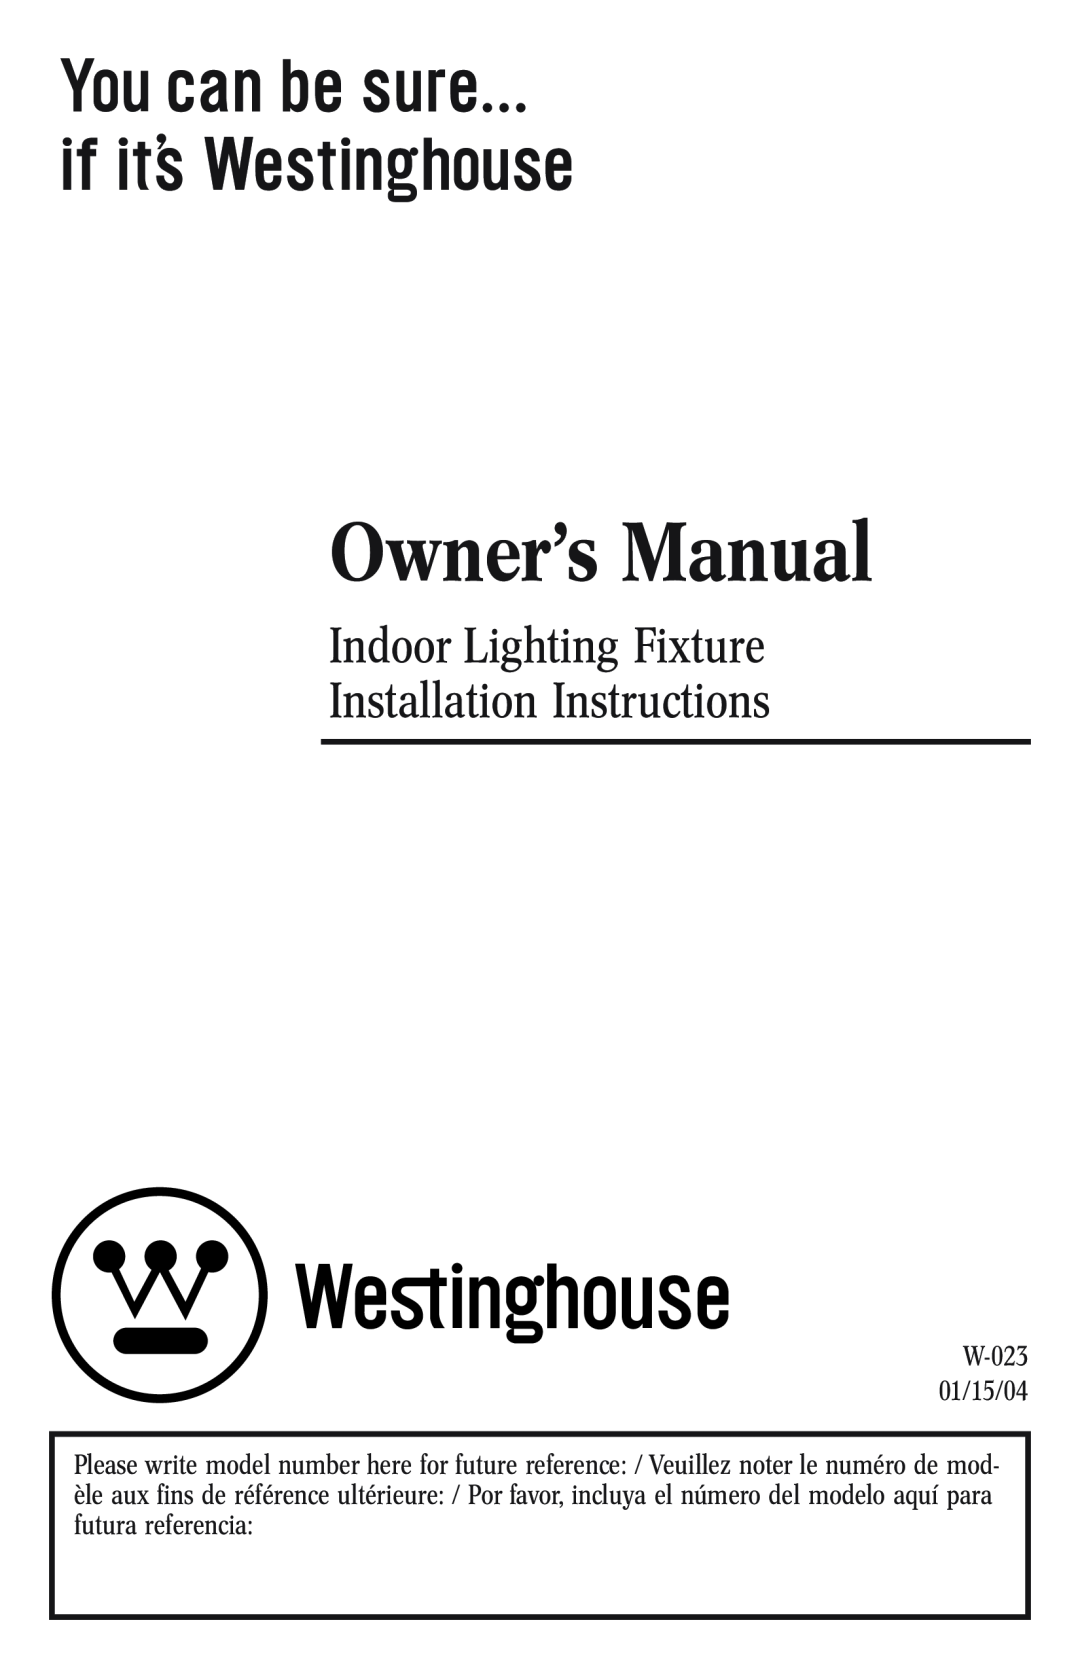 Westinghouse w-023 owner manual Indoor Lighting Fixture Installation Instructions 